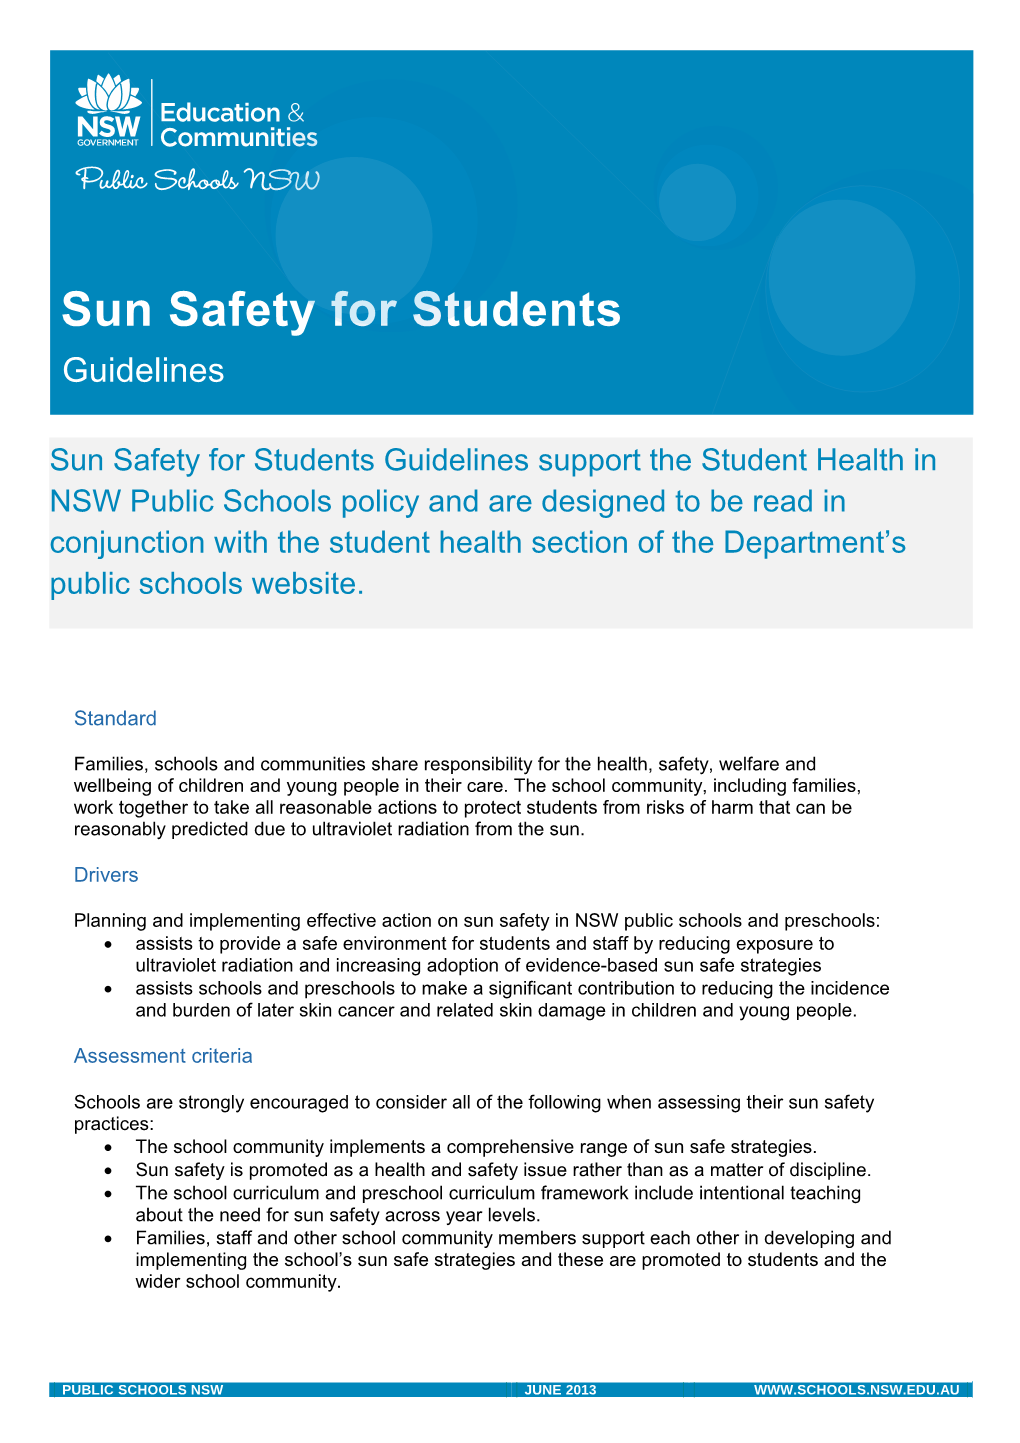 Sun Safety for Students Guidelines